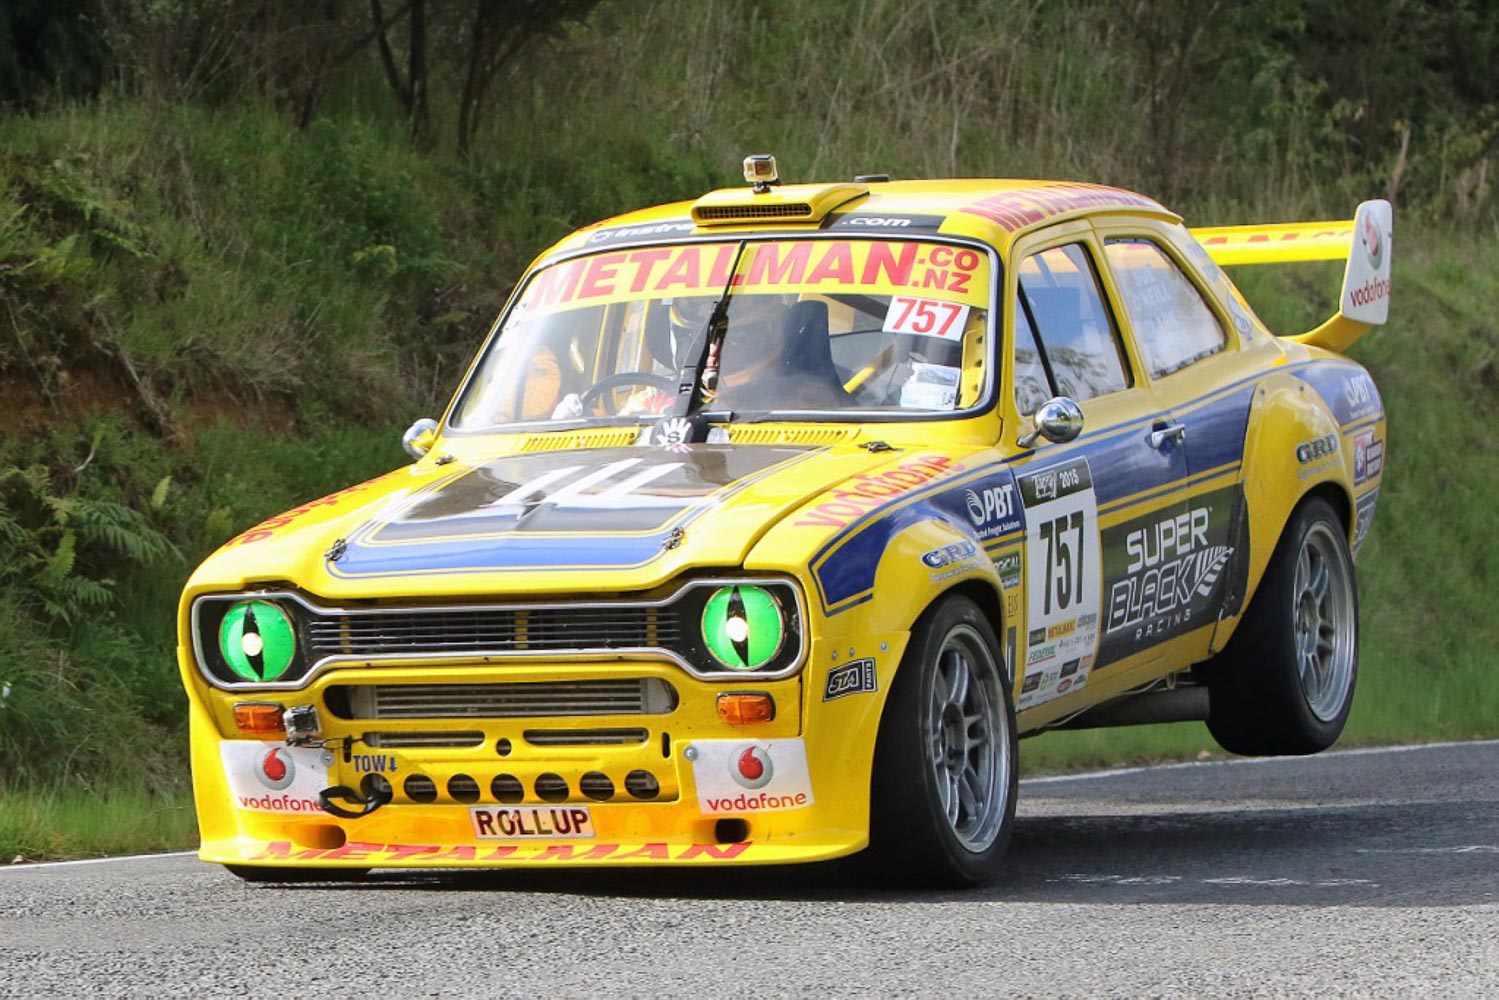 Also retaining their class lead in Instra.com Modern 2WD were Clark Proctor and Sue O'Neill (Ford Escort/Nissan V6)